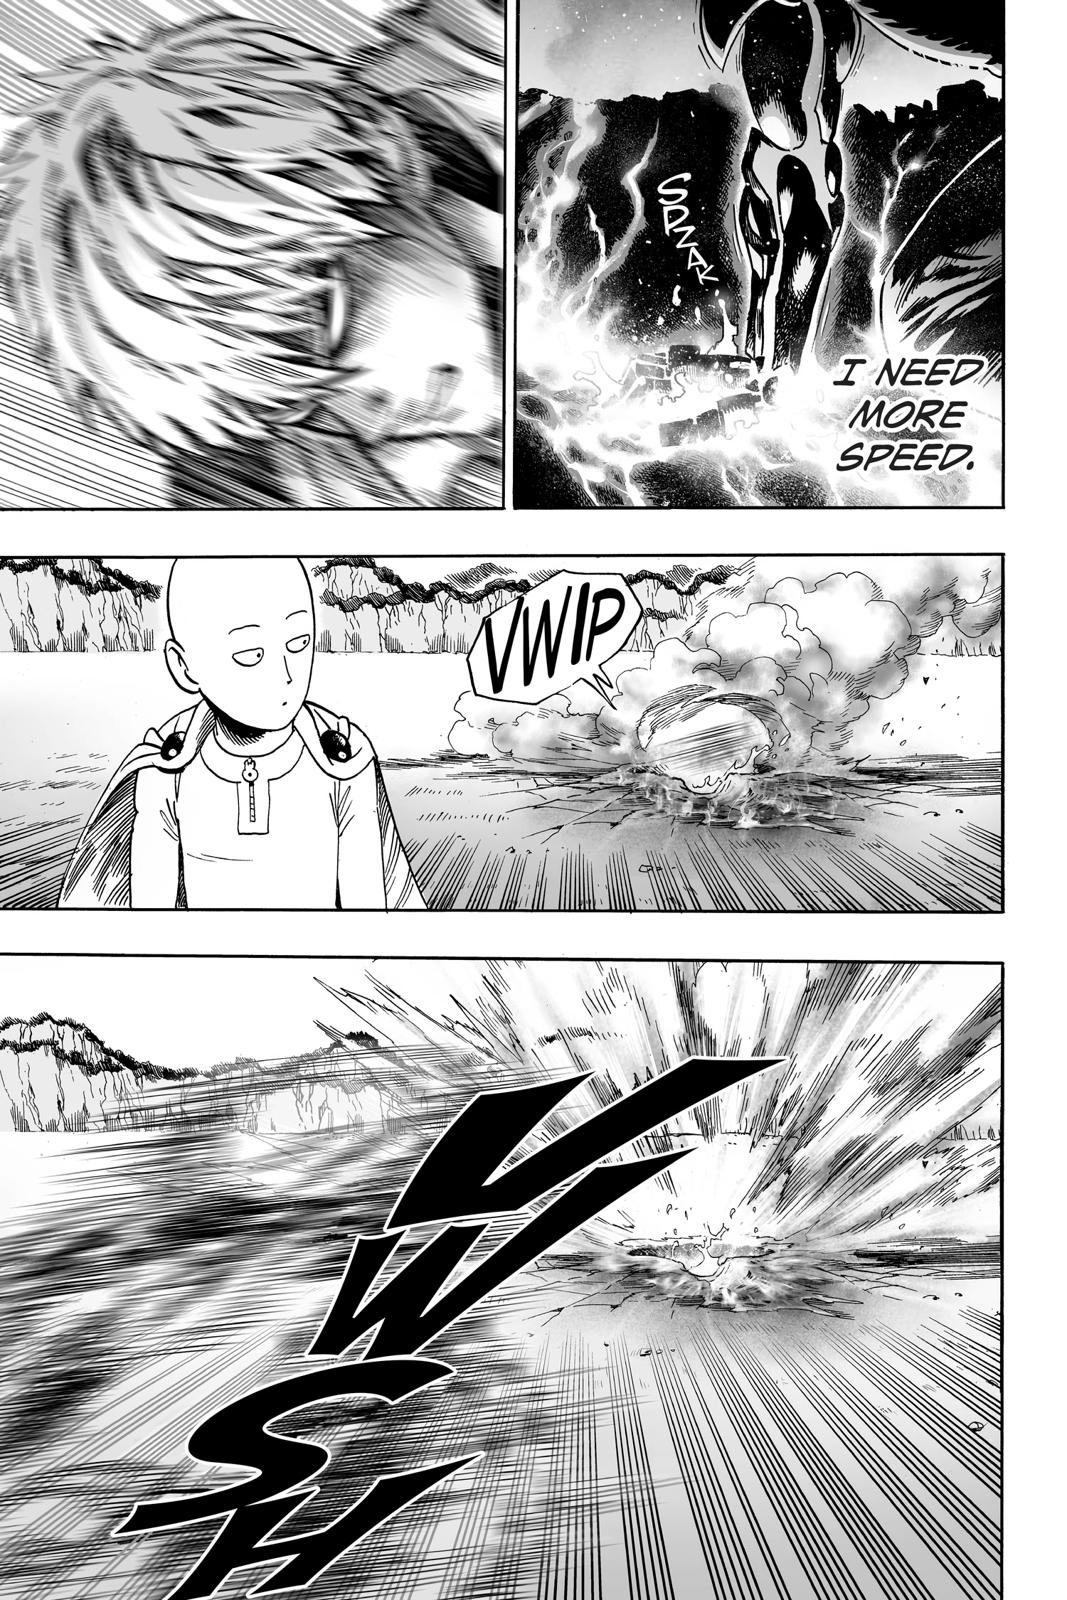 One-Punch Man, Punch 17 image 11